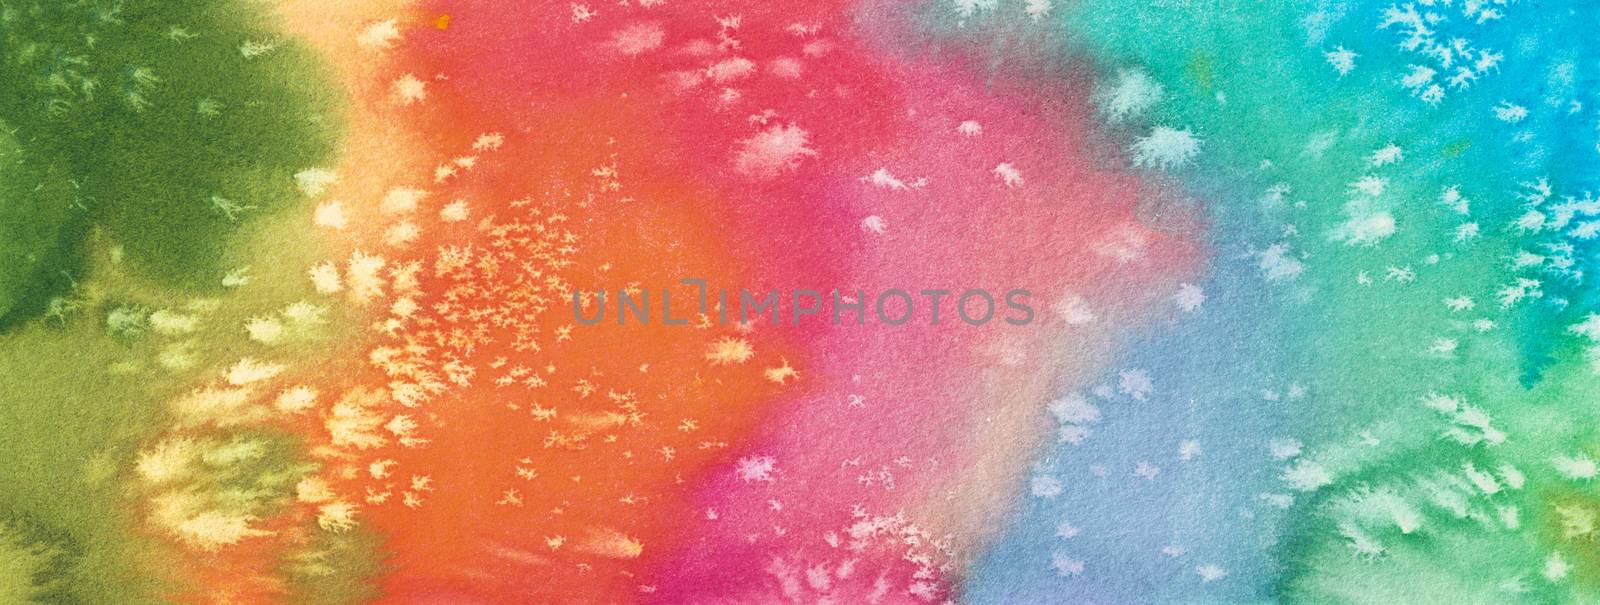 joyful and colorful abstract watercolor background, hand paintin by Ungamrung